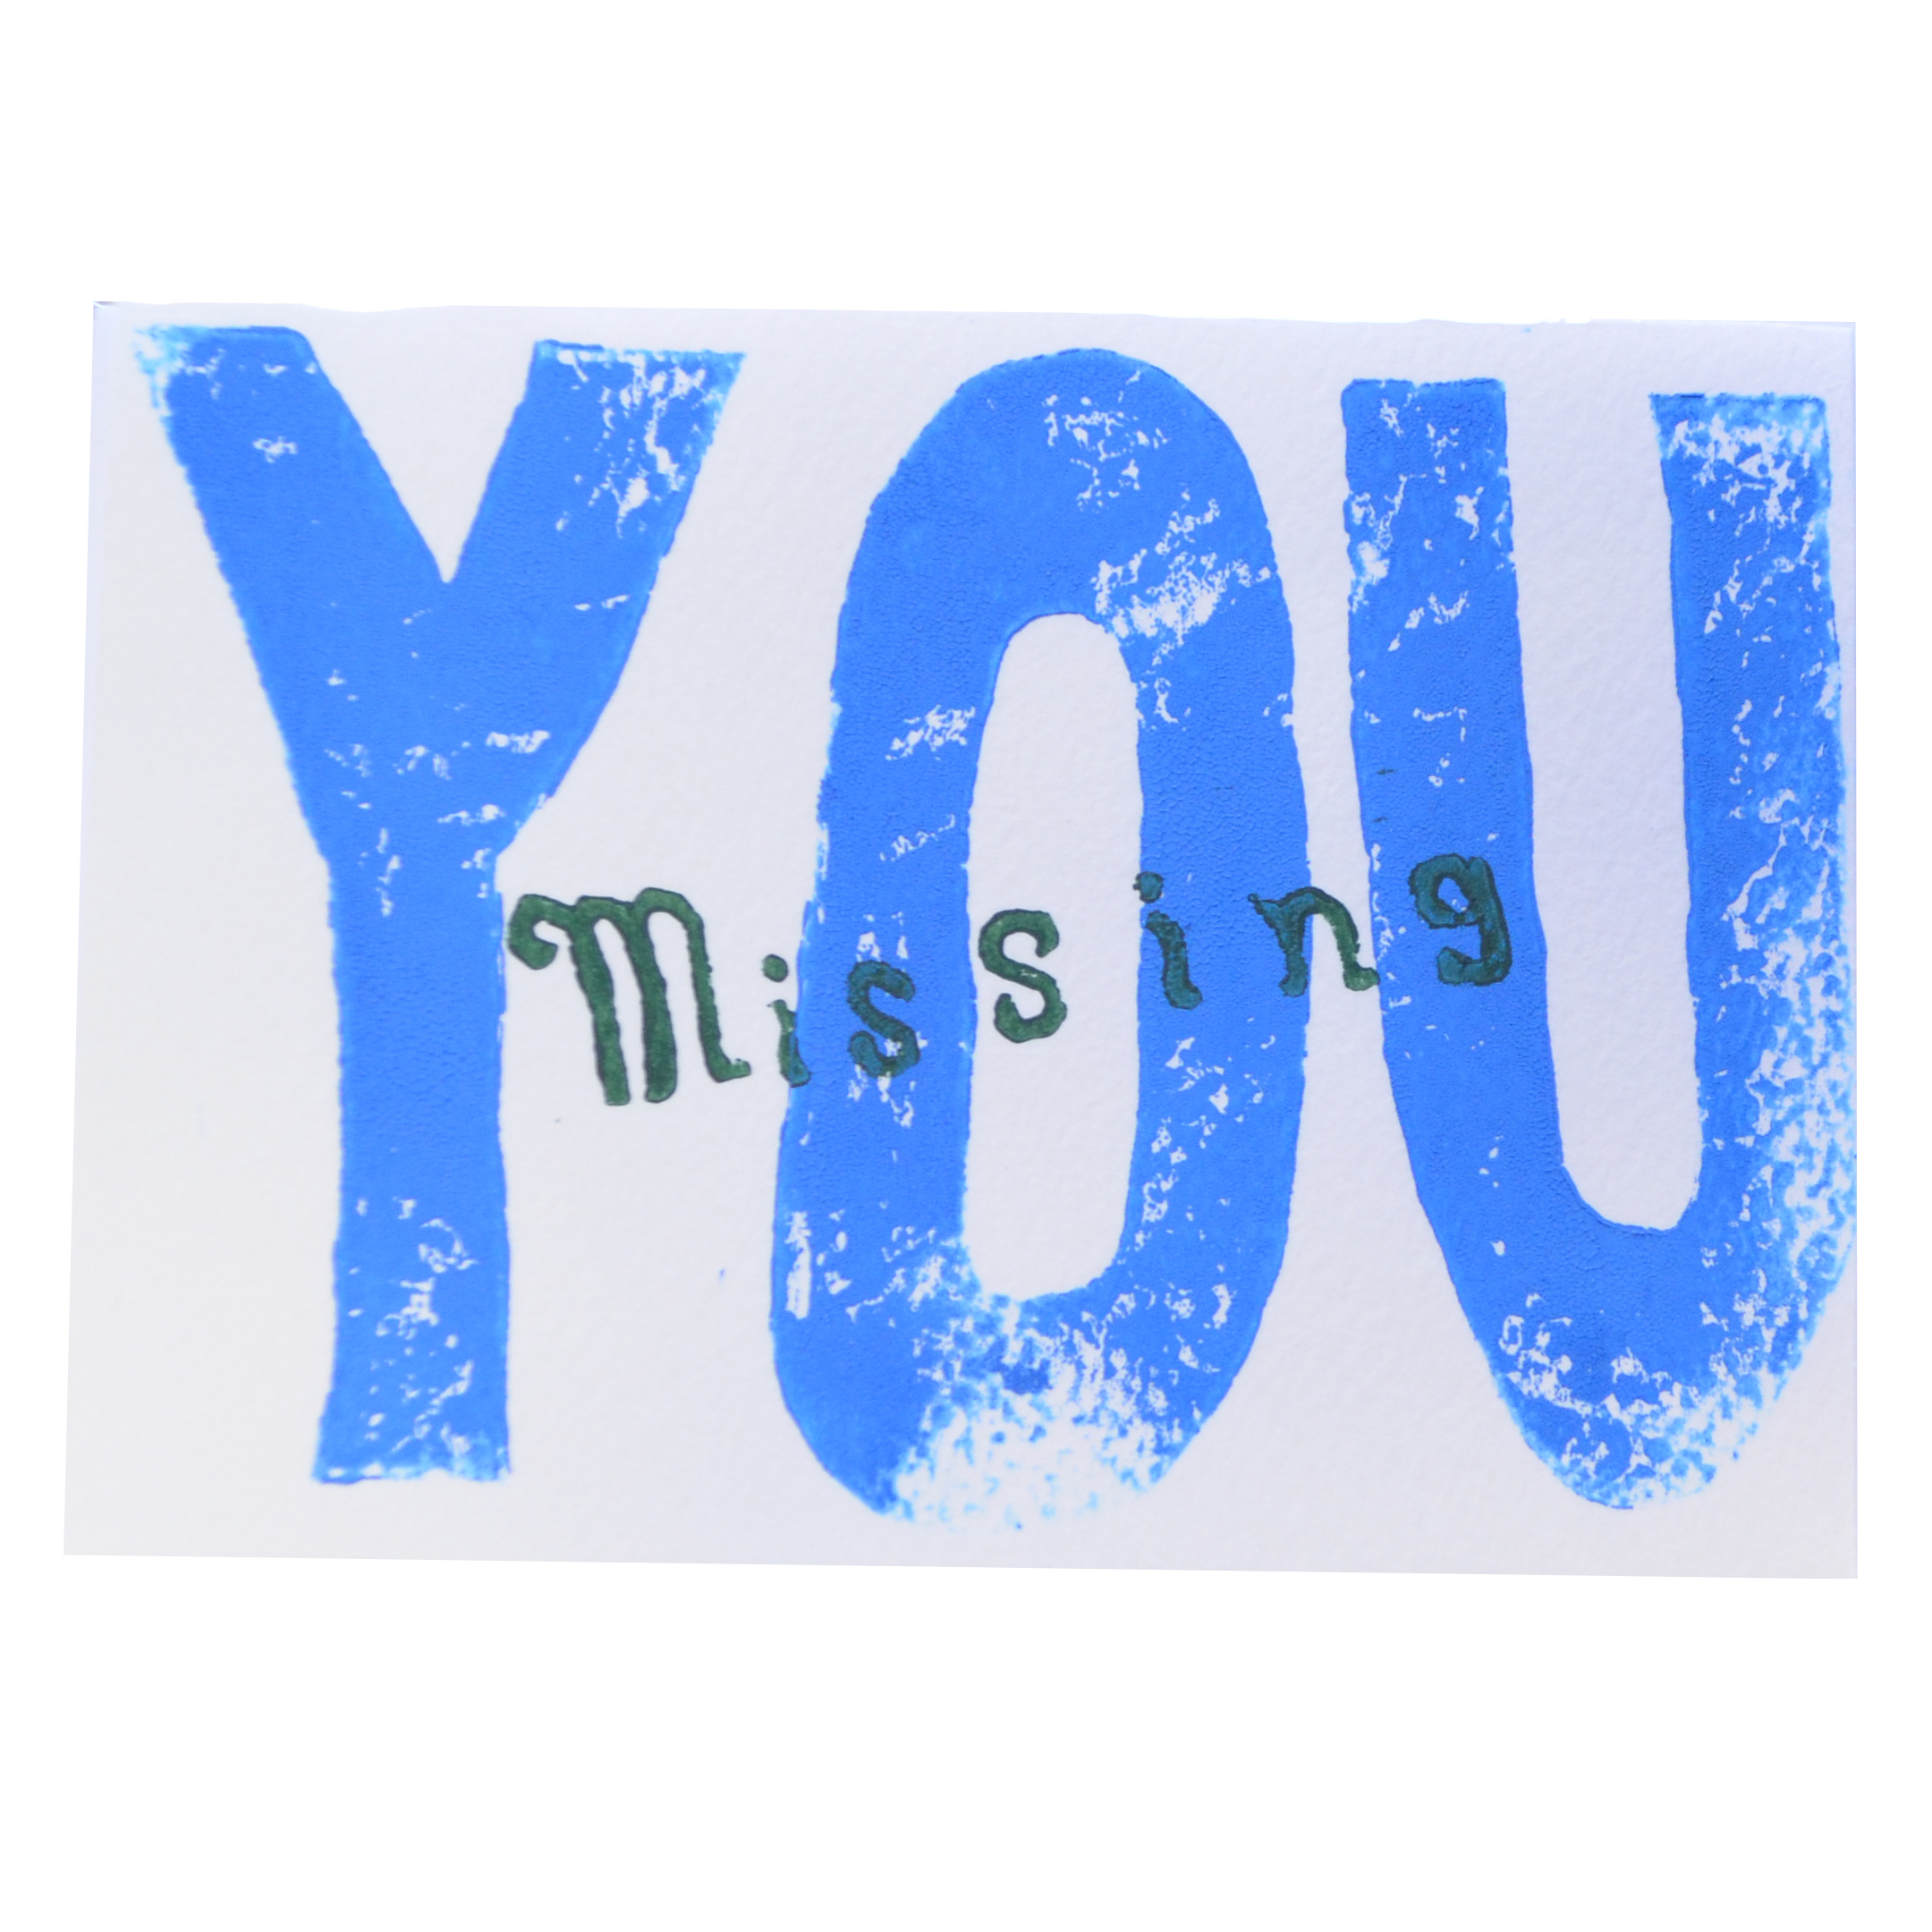 Missing You (blue) card by Paul Eno